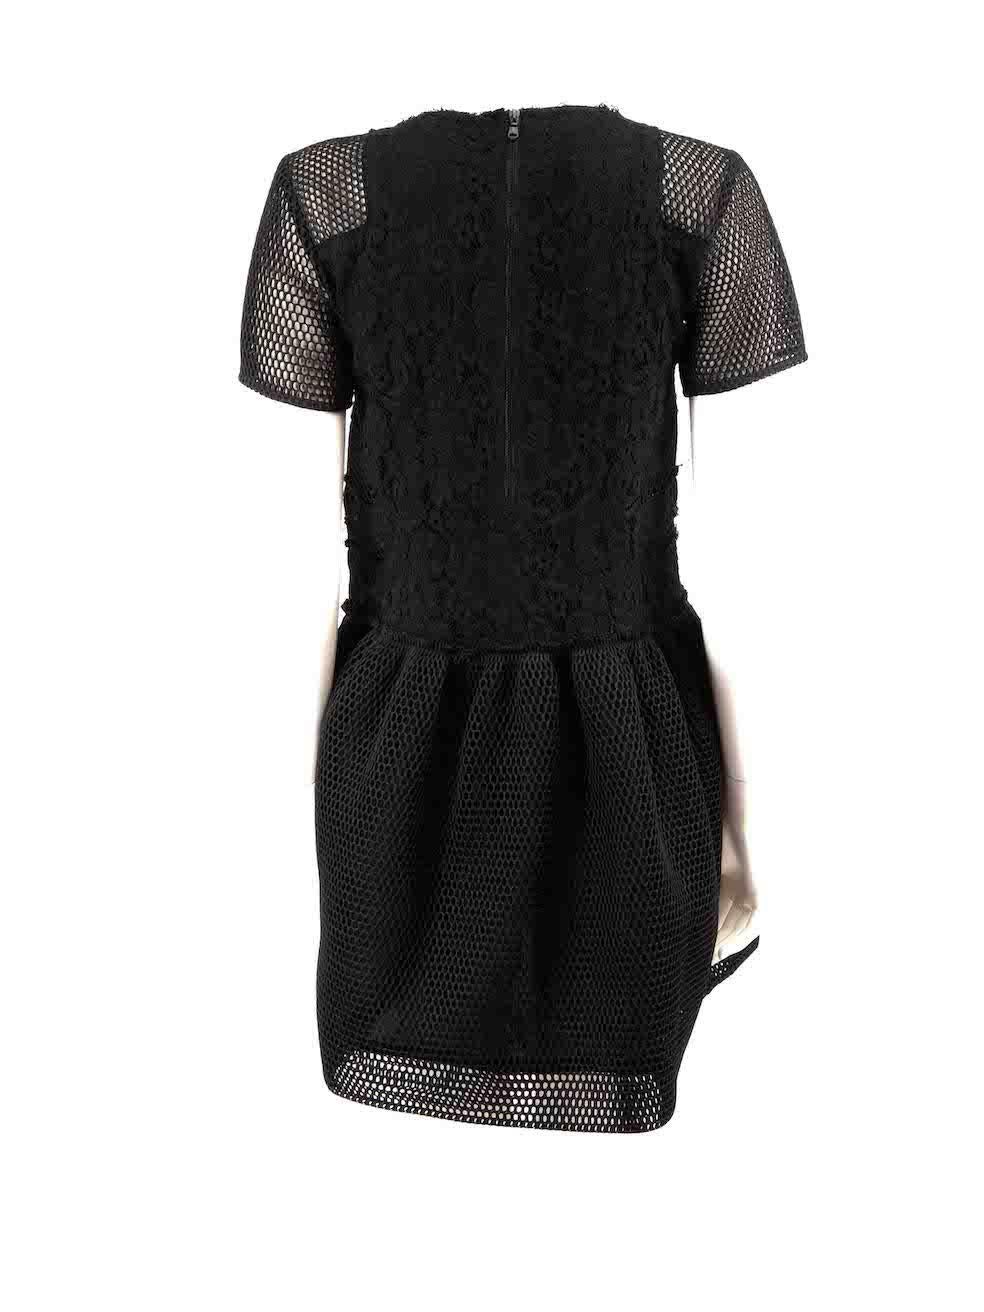 Sea New York Black Lace Panel Mesh Mini Dress Size XXS In Good Condition For Sale In London, GB